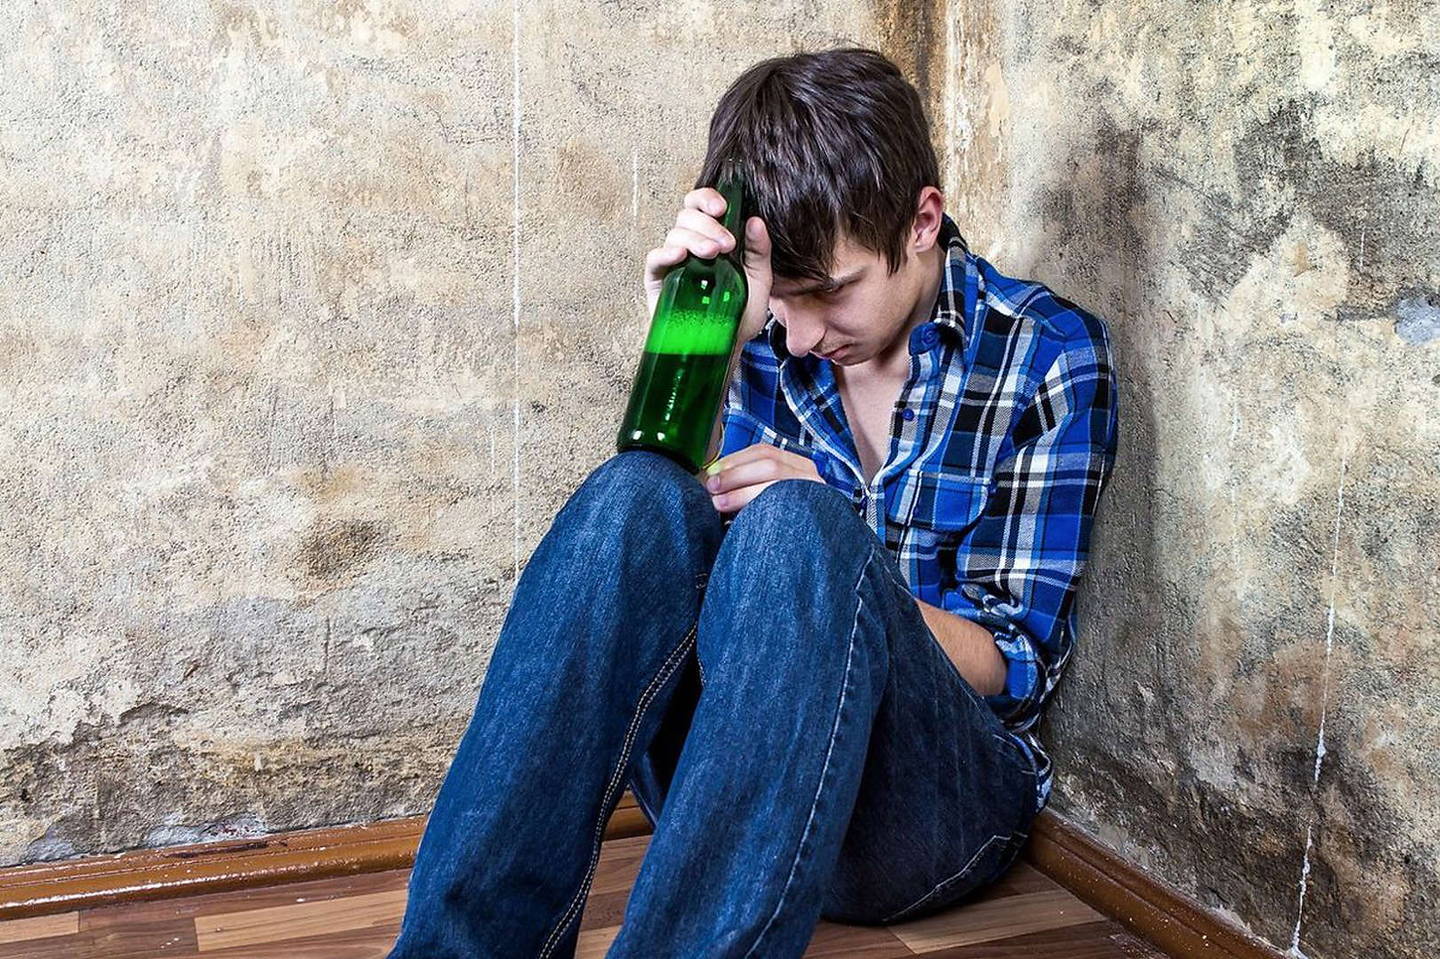 AUD affects a staggering number of adolescents even though they legally shouldn't be able to drink.